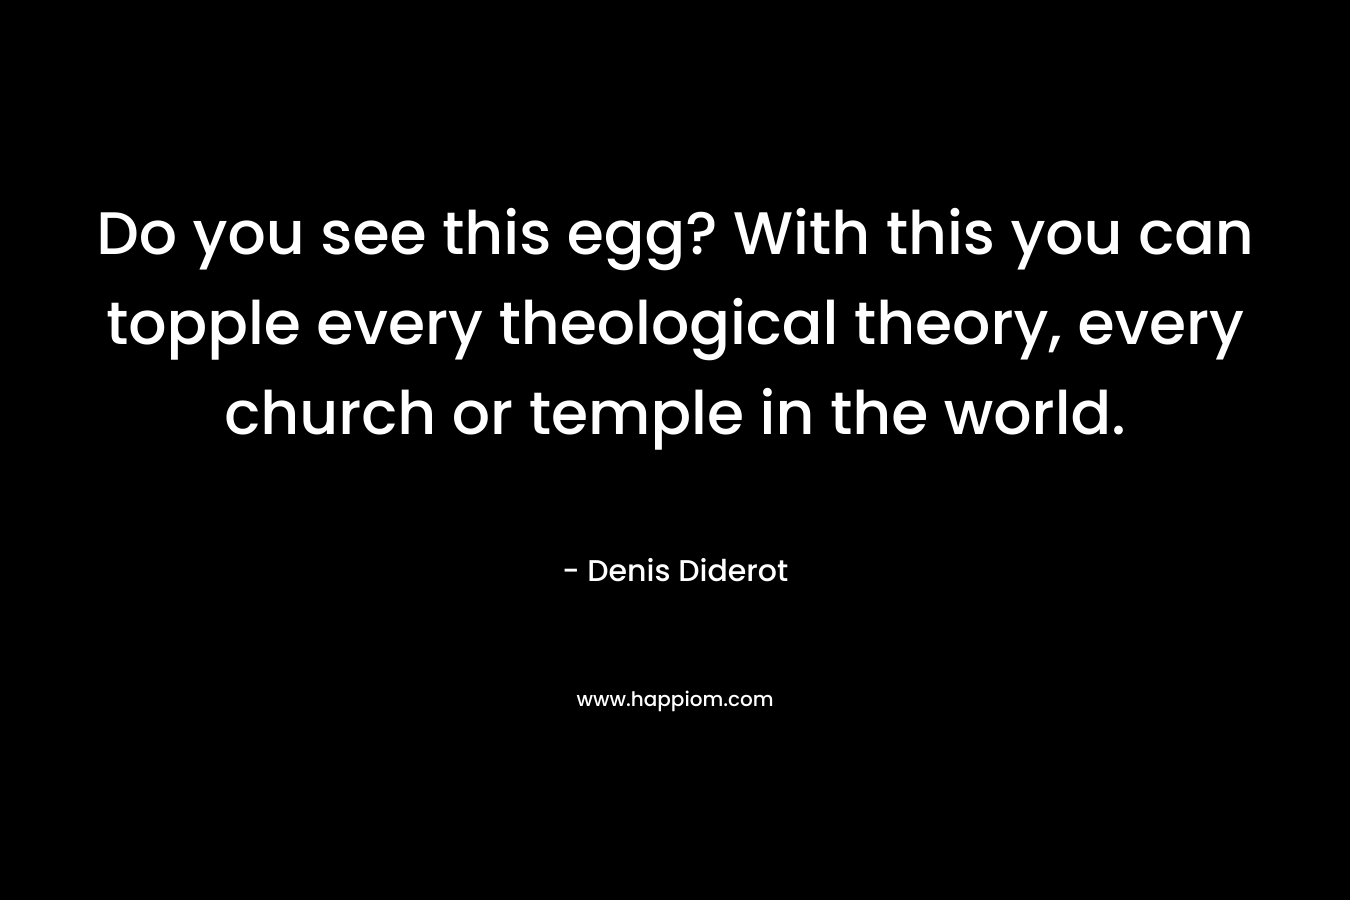 Do you see this egg? With this you can topple every theological theory, every church or temple in the world.